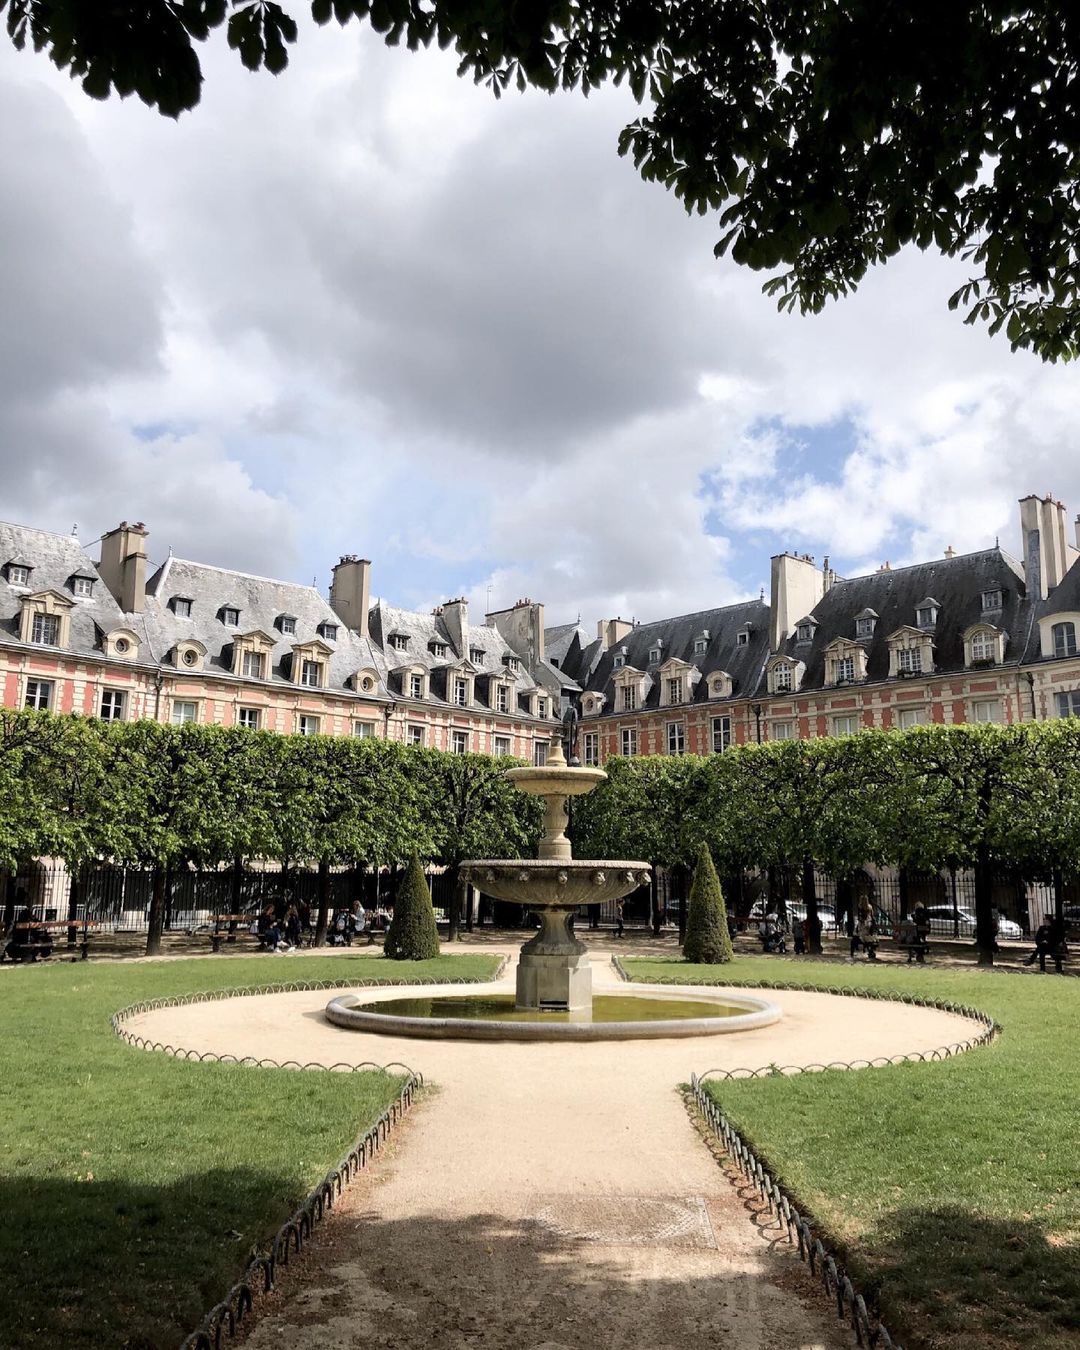 One of the corner fountains in Place des Vosges